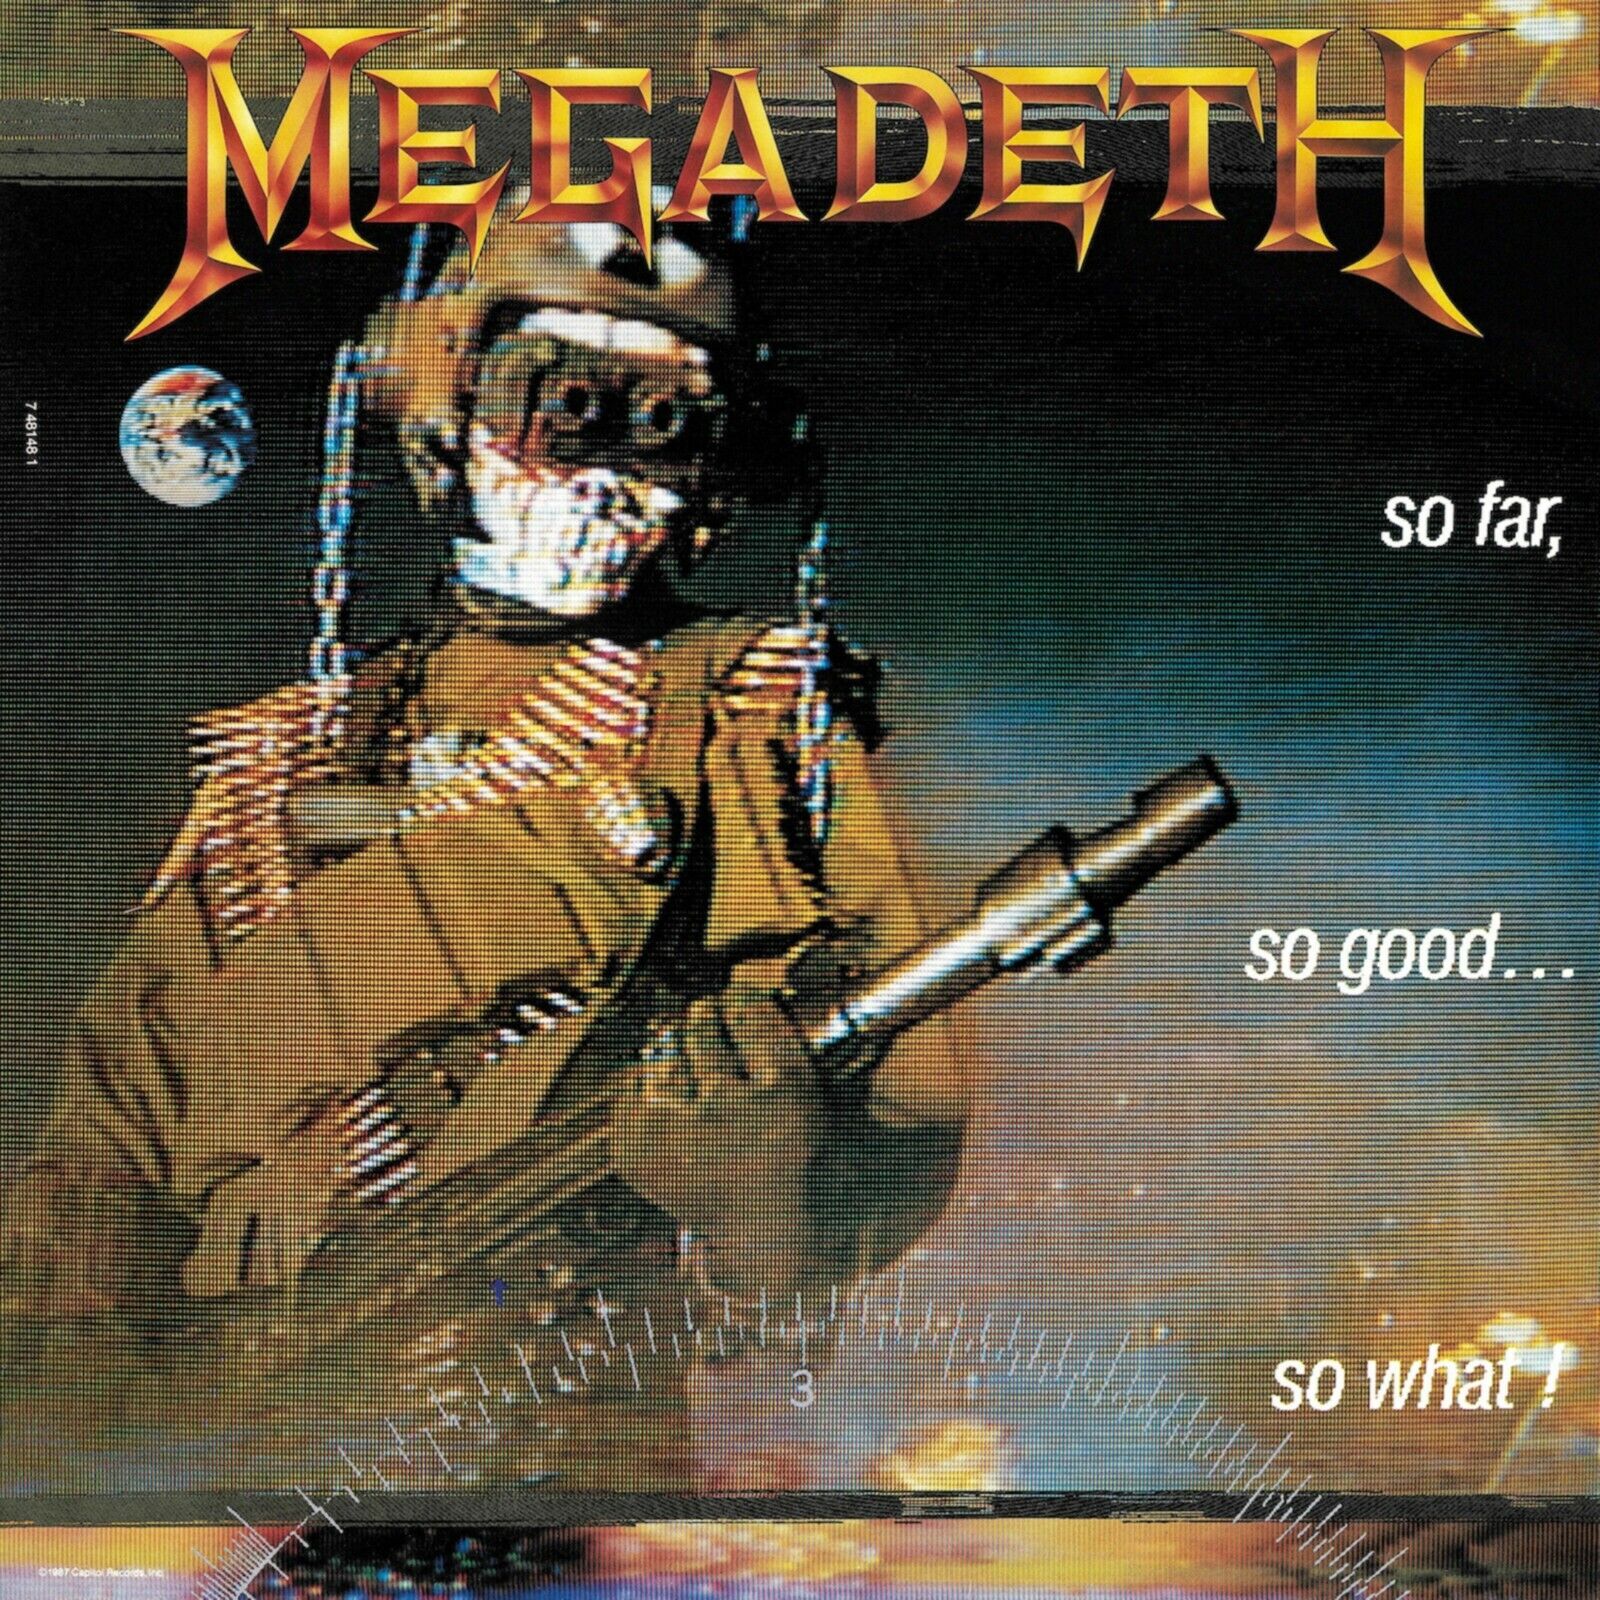 MEGADETH So Far Good What BANNER Poster Fabric HUGE Shipping included 4X4 Ft Ranking TOP5